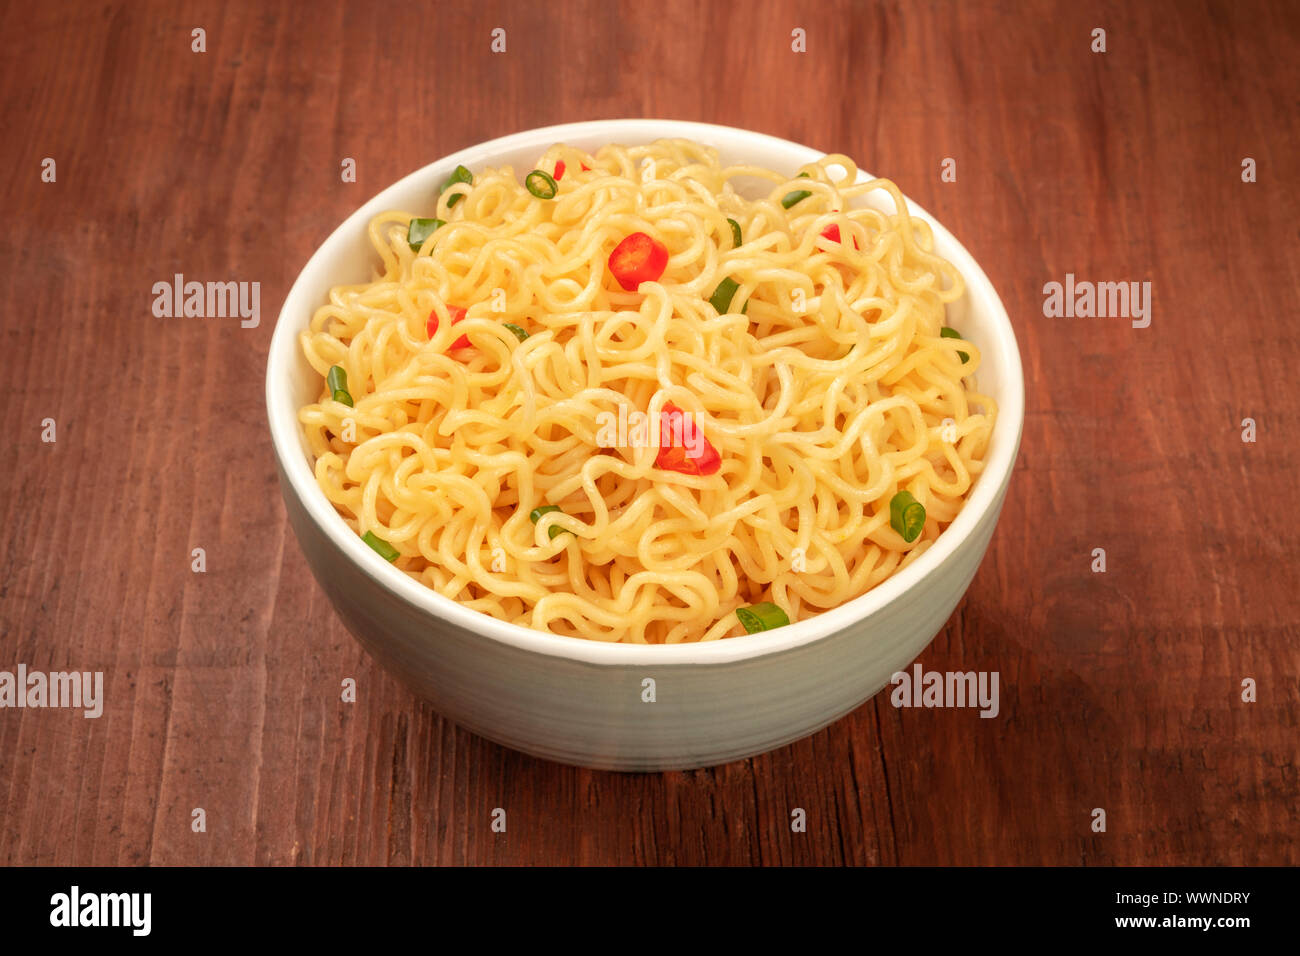 A Bowl Of Noodles On A Dark Rustic Wooden Background Stock Photo Alamy